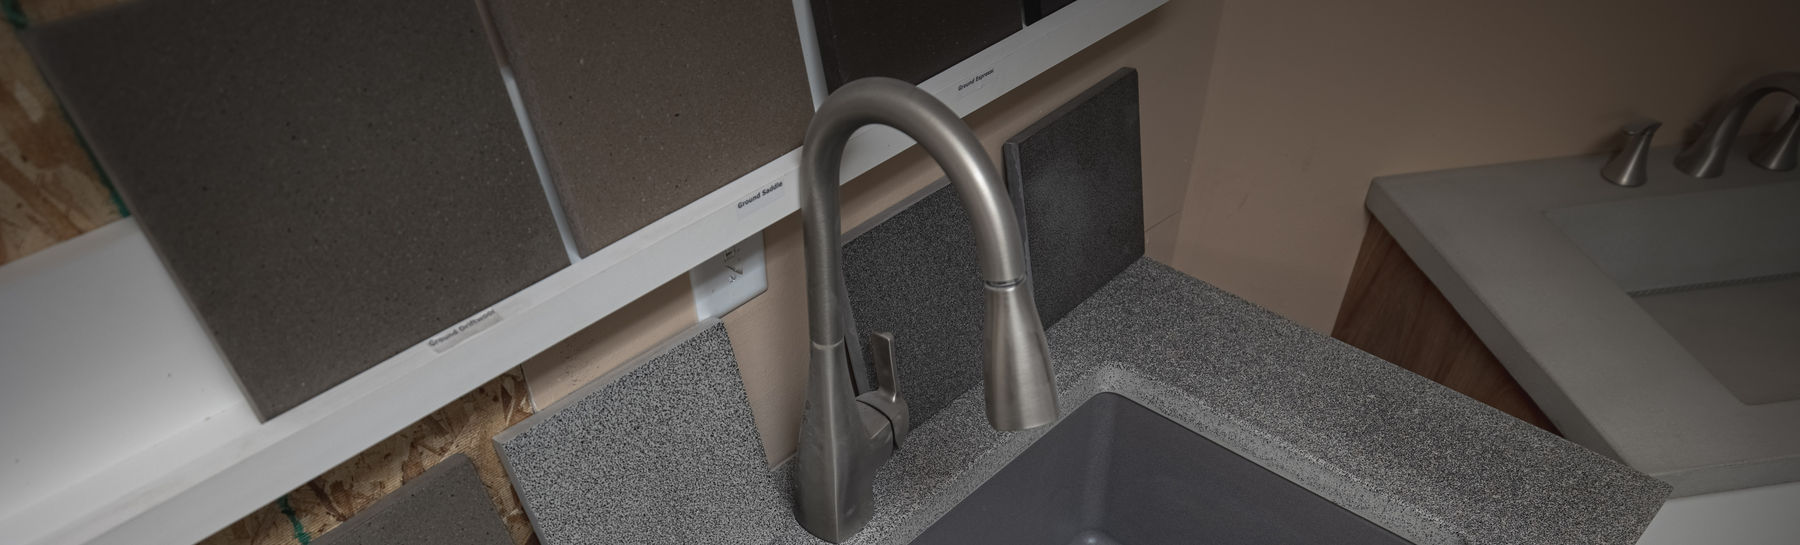 Versatile Concrete accomplishes the pebbled finish on this concrete sink using a reclaimed local material called slag. 